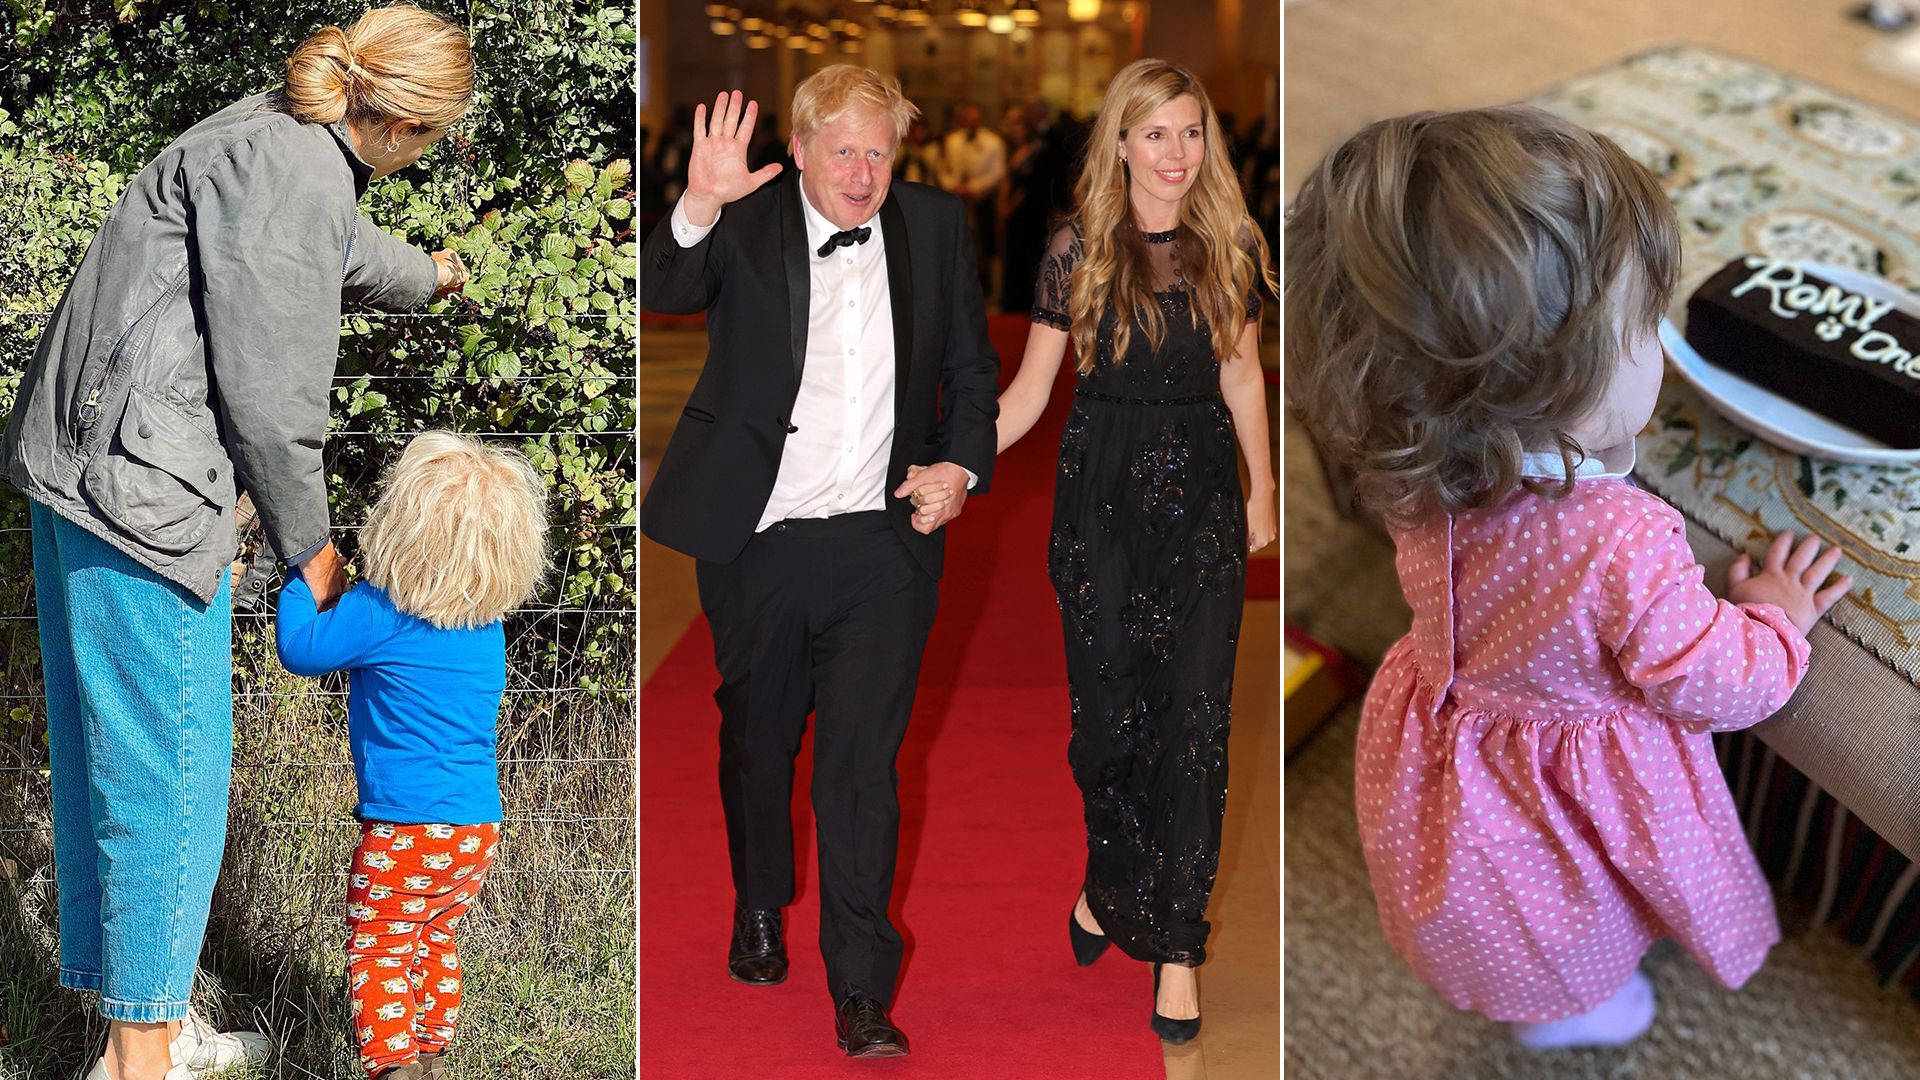 Split image showing Boris Johnson, his wife Carrie and two of their three children